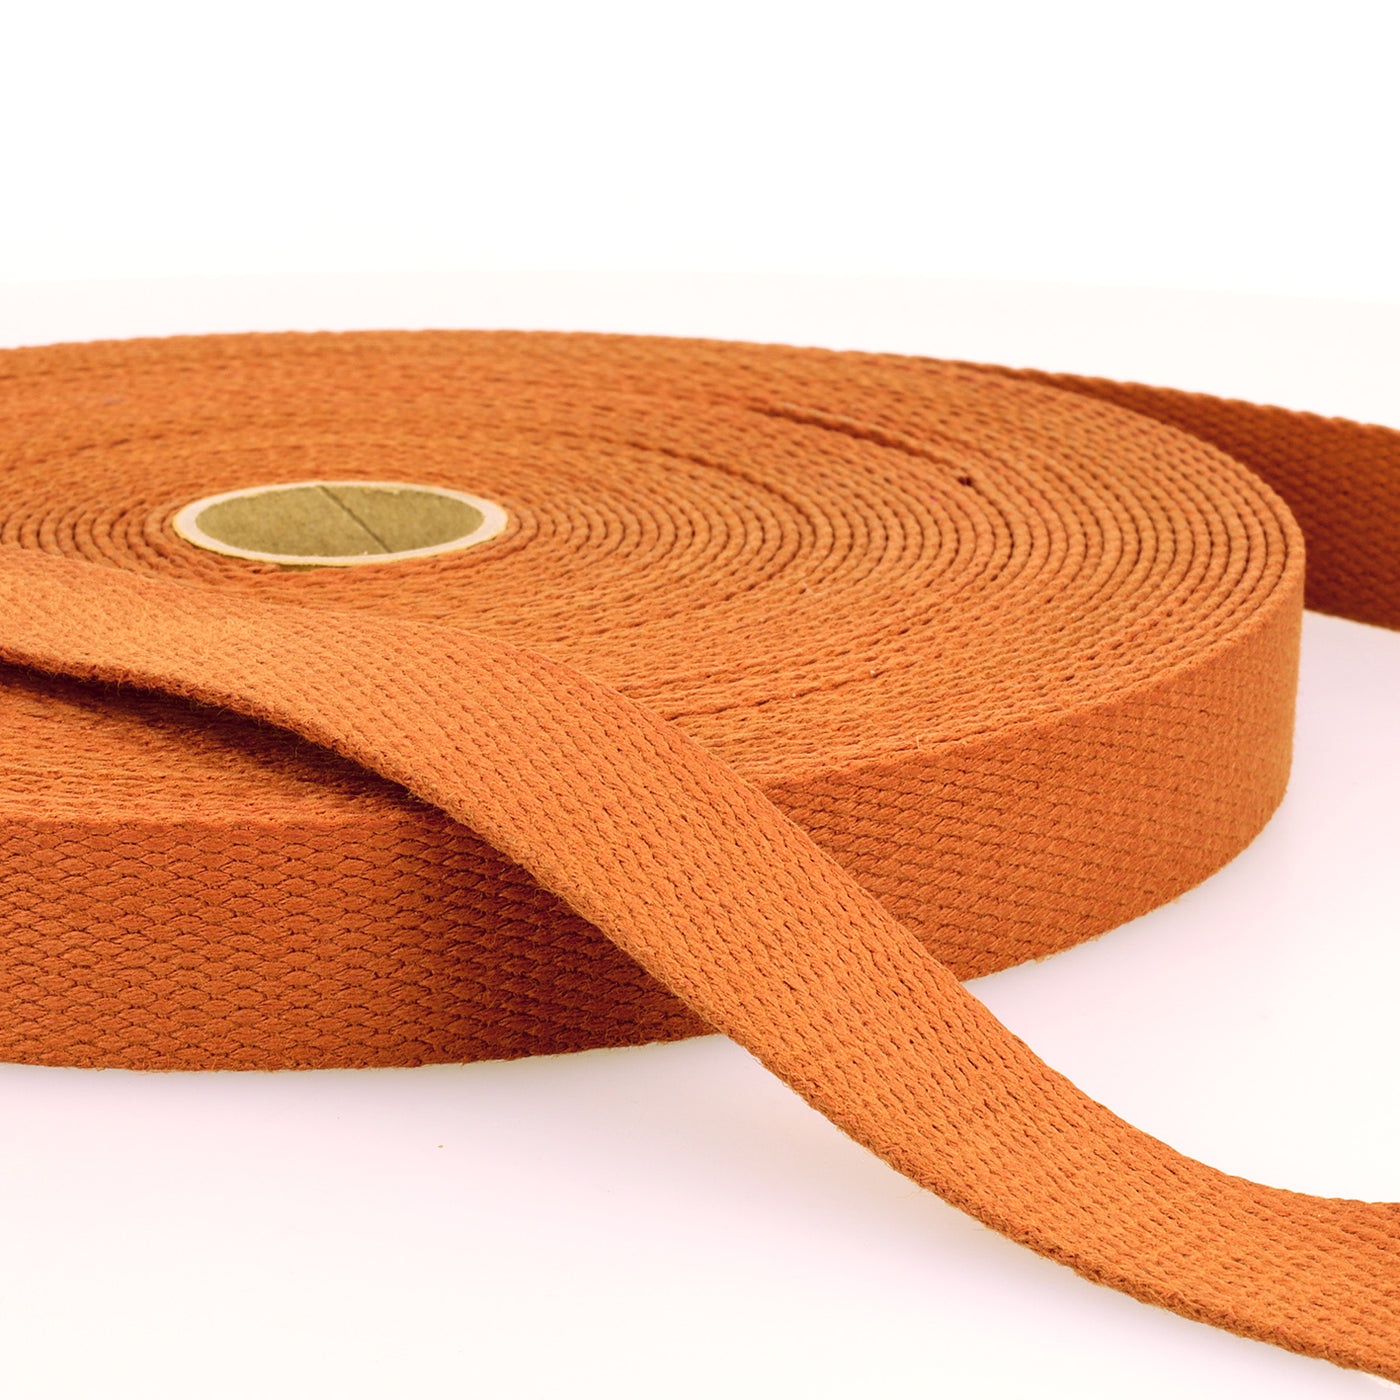 25 mm /30mm Solid Plain Cotton Stephanoise Webbing bag strapping. Per metre.